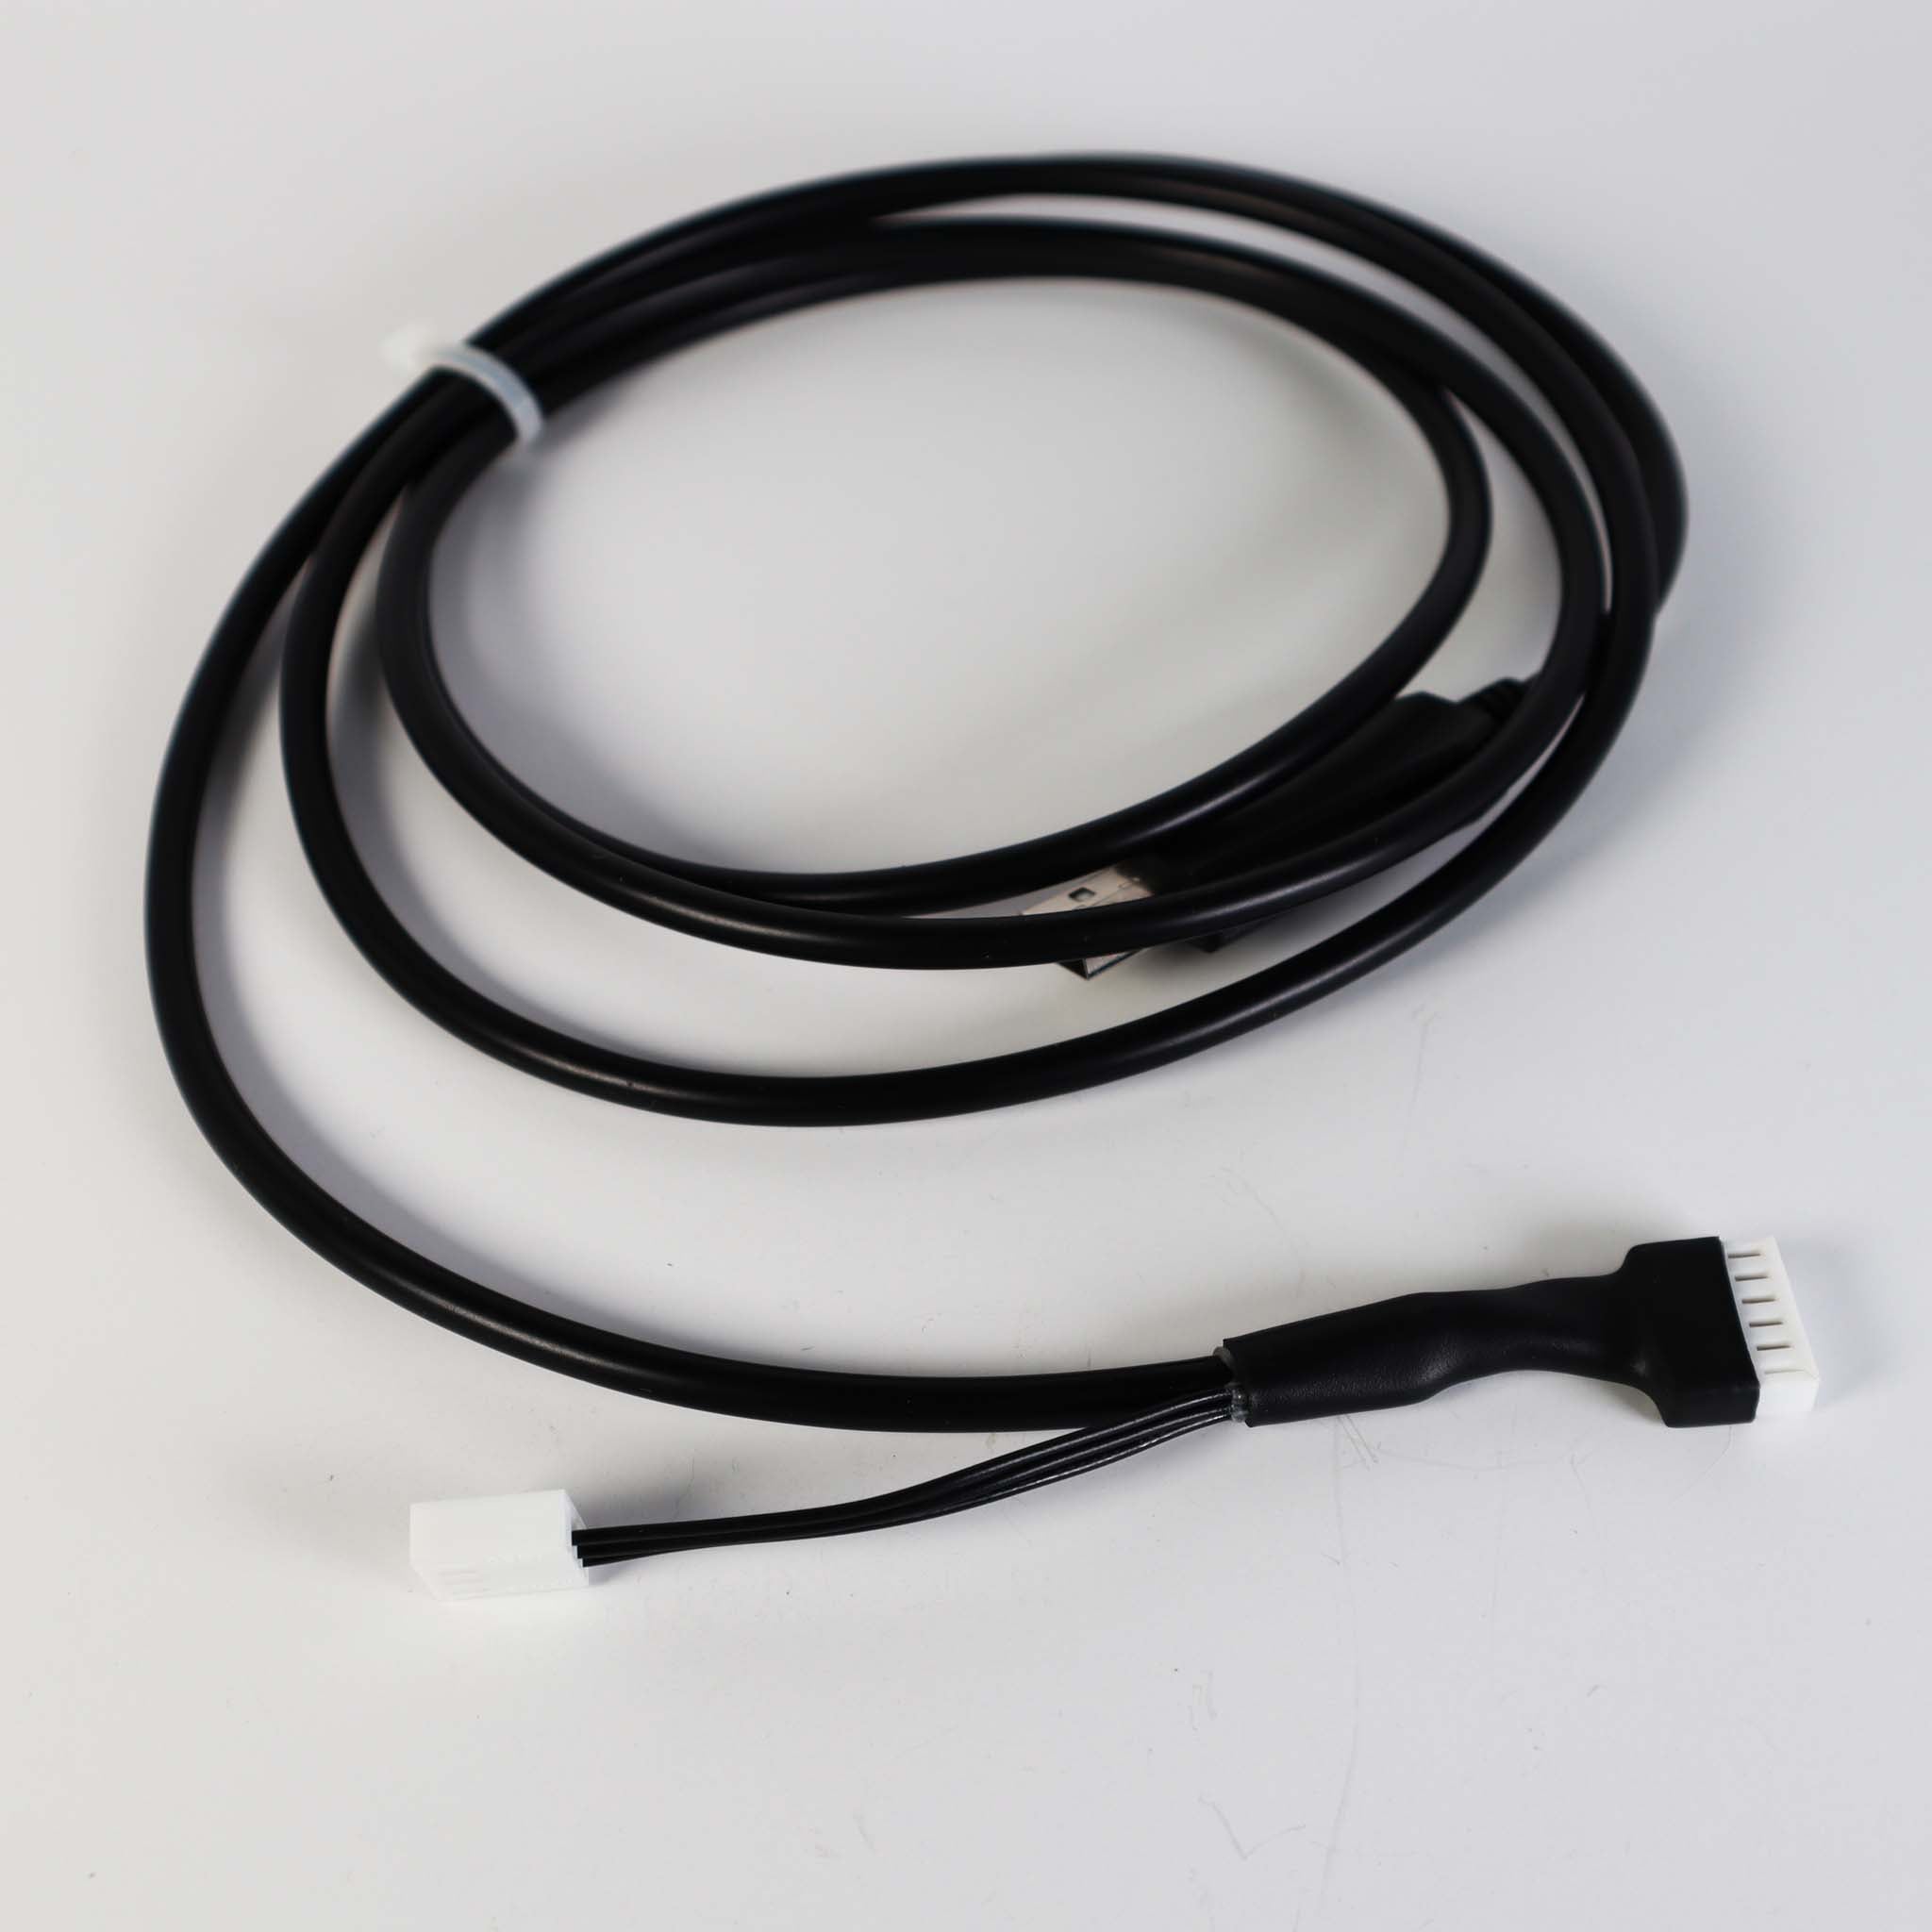 Hysecurity MX4138 START Smart Touch Cable Kit